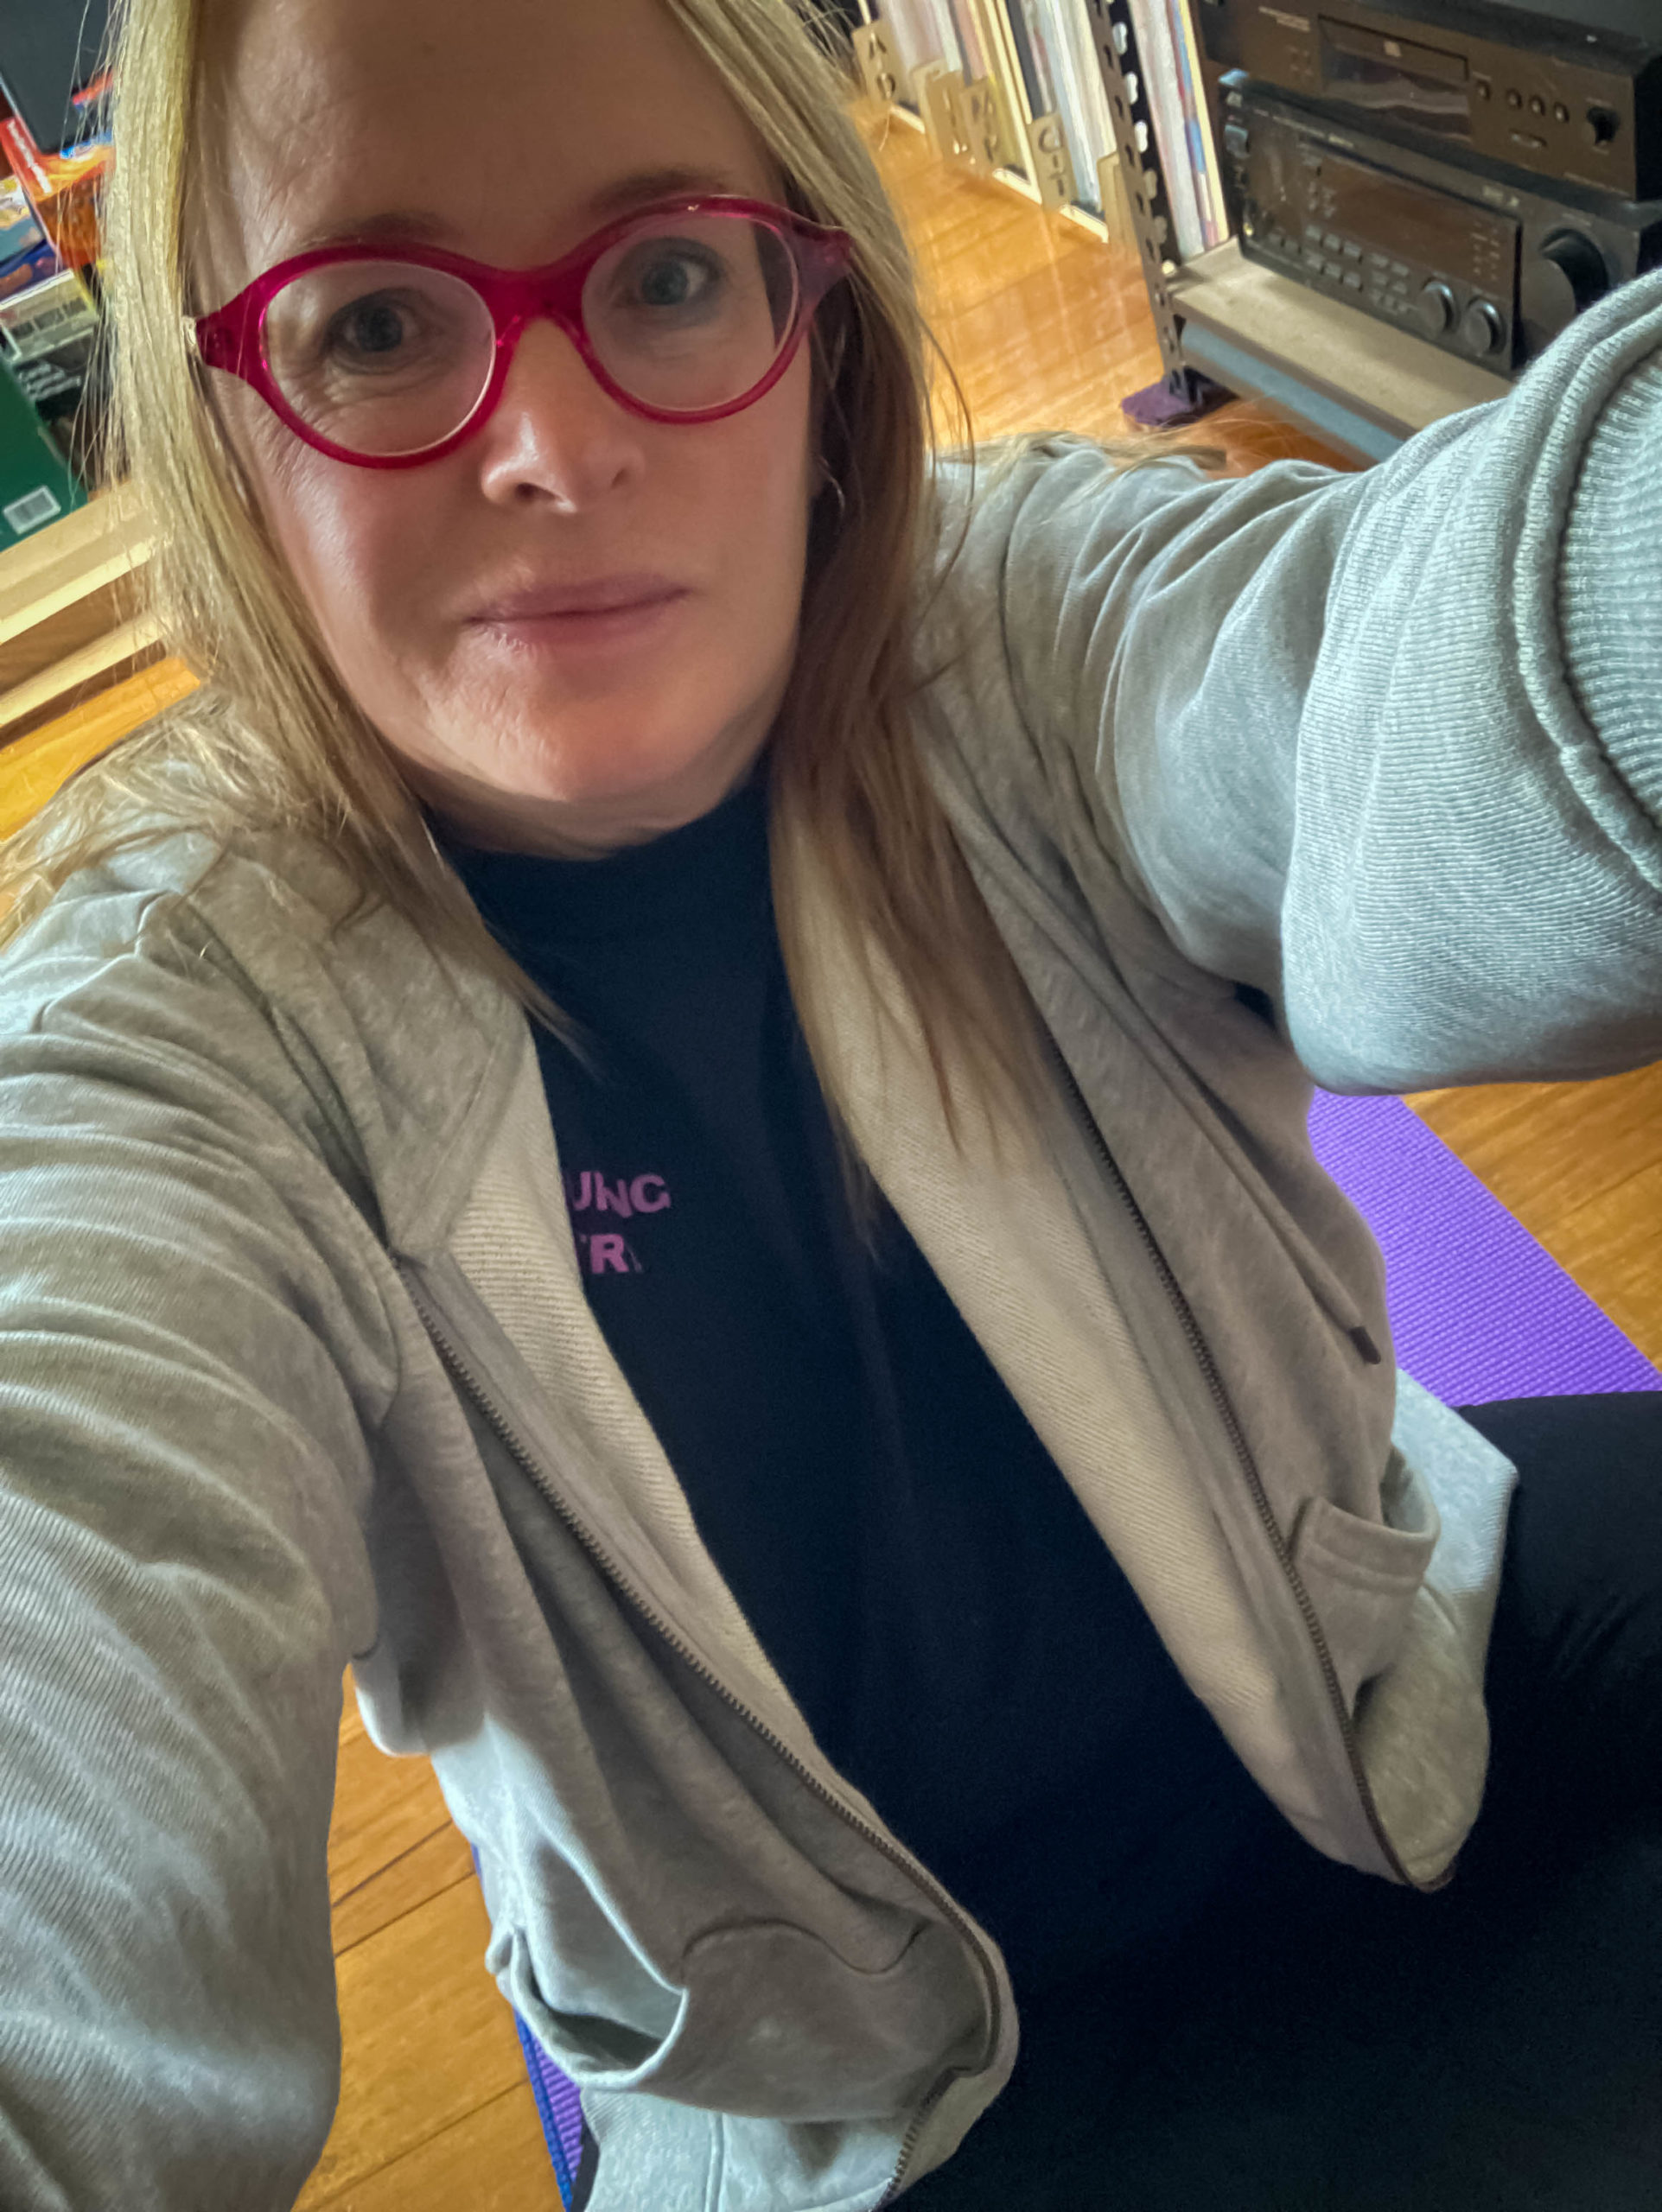 Barb is wearing a grey hoody and pink glasses. She is attempting to stand up from a seated position on the floor without using her hands